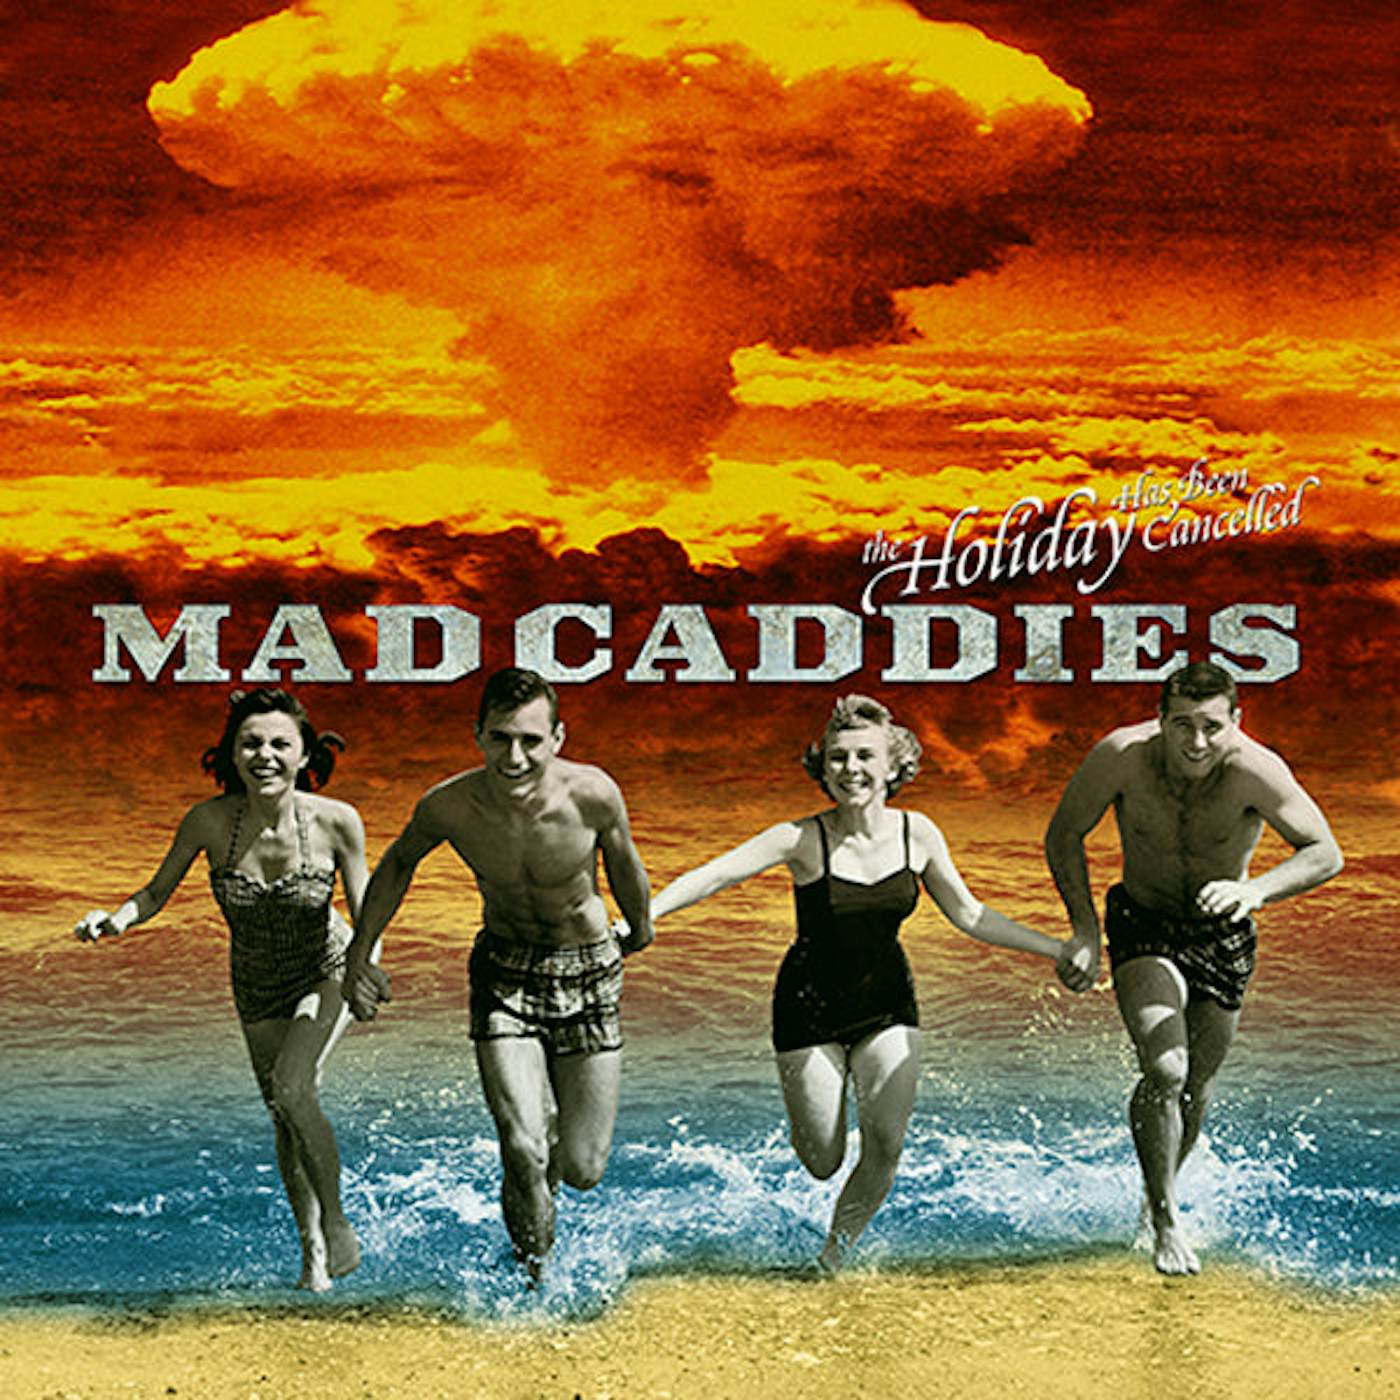 Mad Caddies LP - The Holiday Has Been Cancelled (Vinyl)